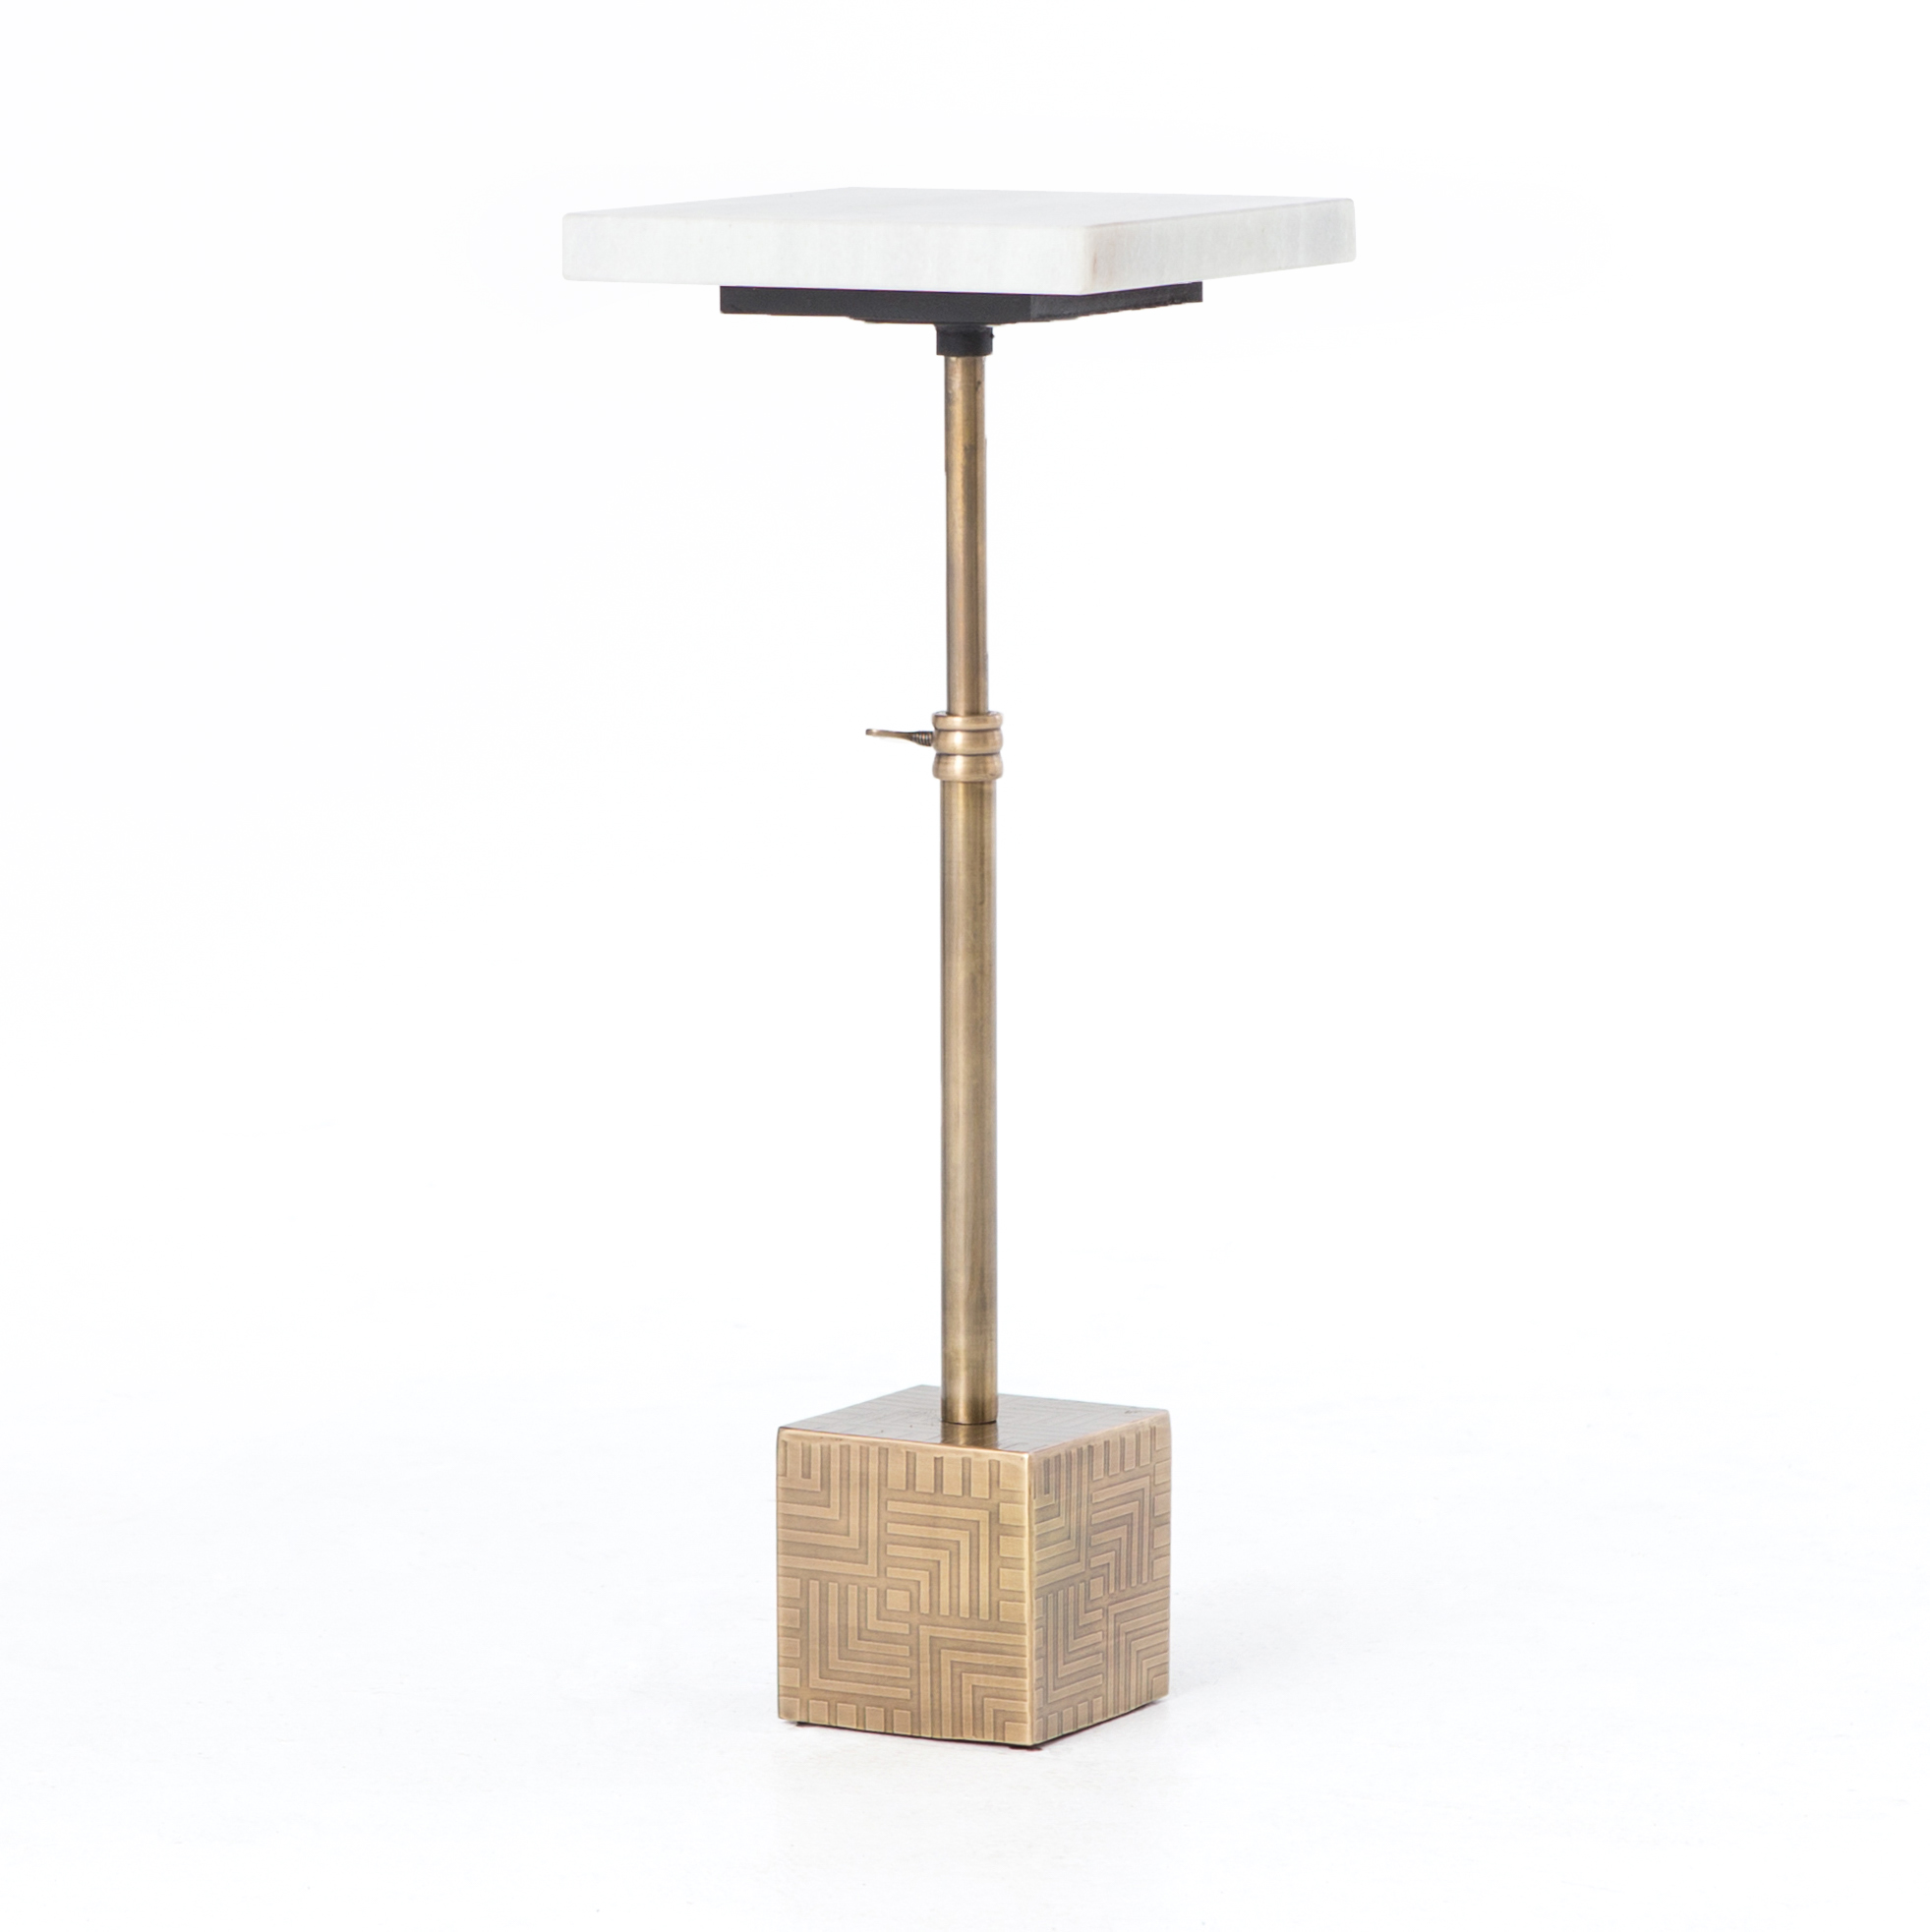 Sirius accent table from Four Hands